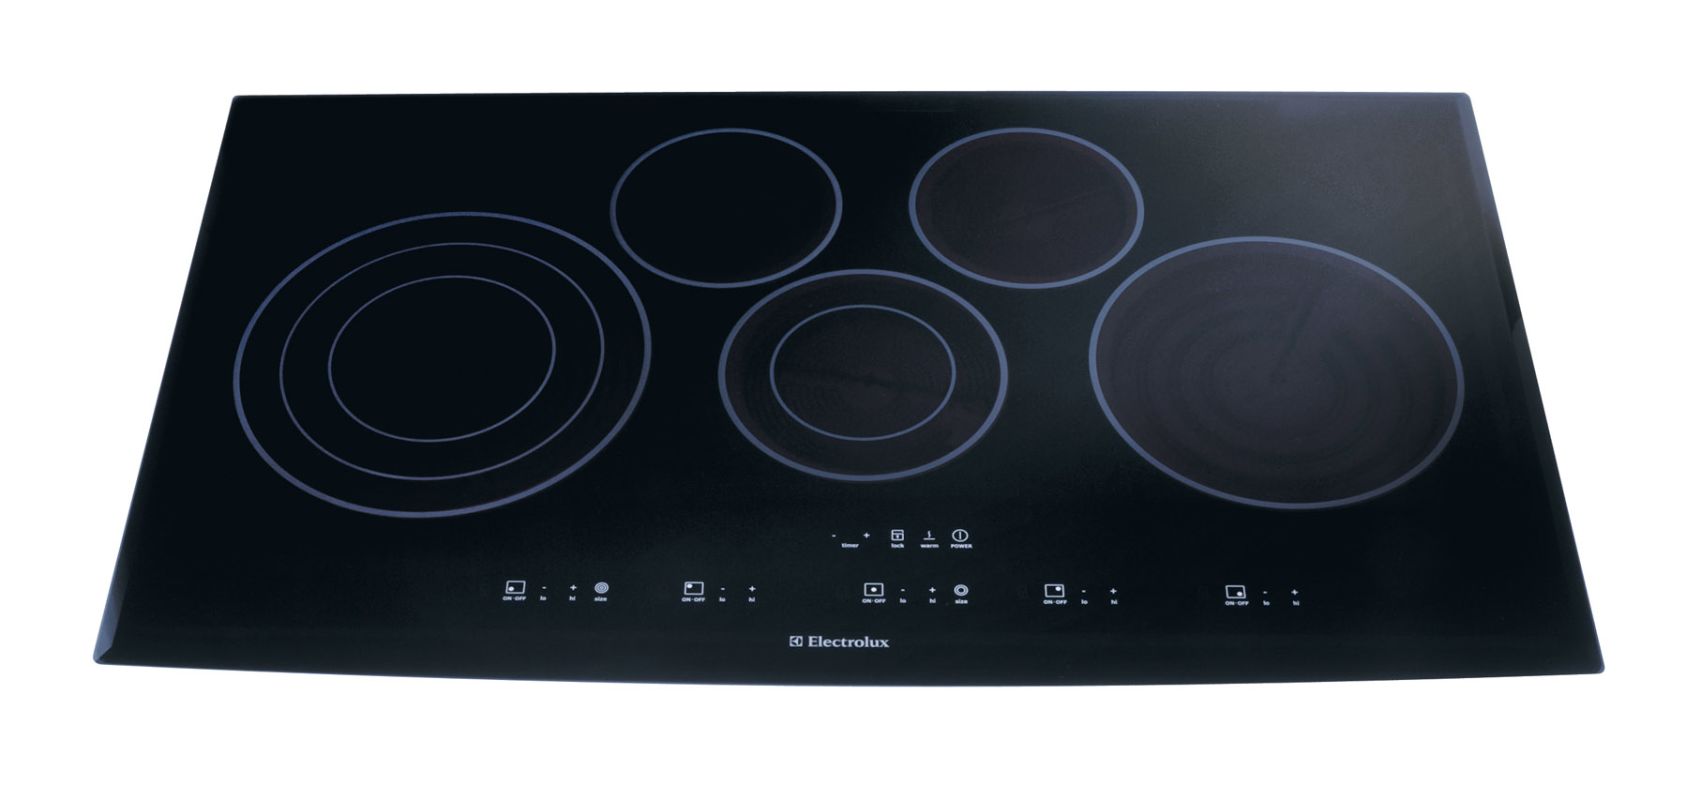 Electrolux EI36EC45K 36 Electric Touch-Control Cooktop Black Cooktops Electric